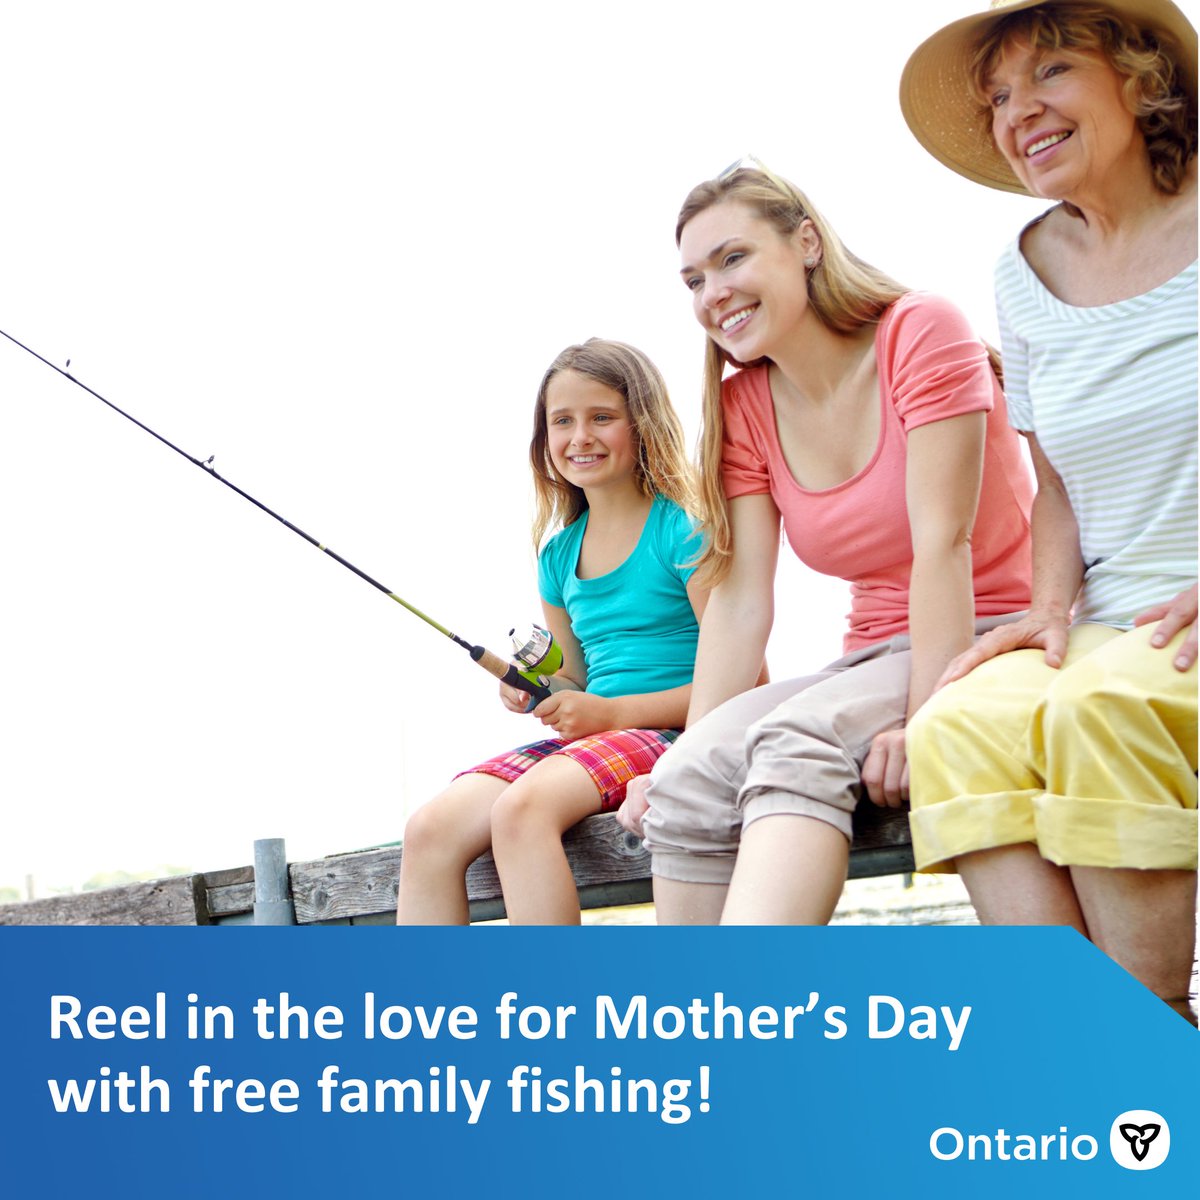 Give the gift of Ontario’s great outdoors with free family fishing this Mother’s Day weekend. Experience the vast fishing opportunities available across the province. Learn more: Ontario.ca/freefishing